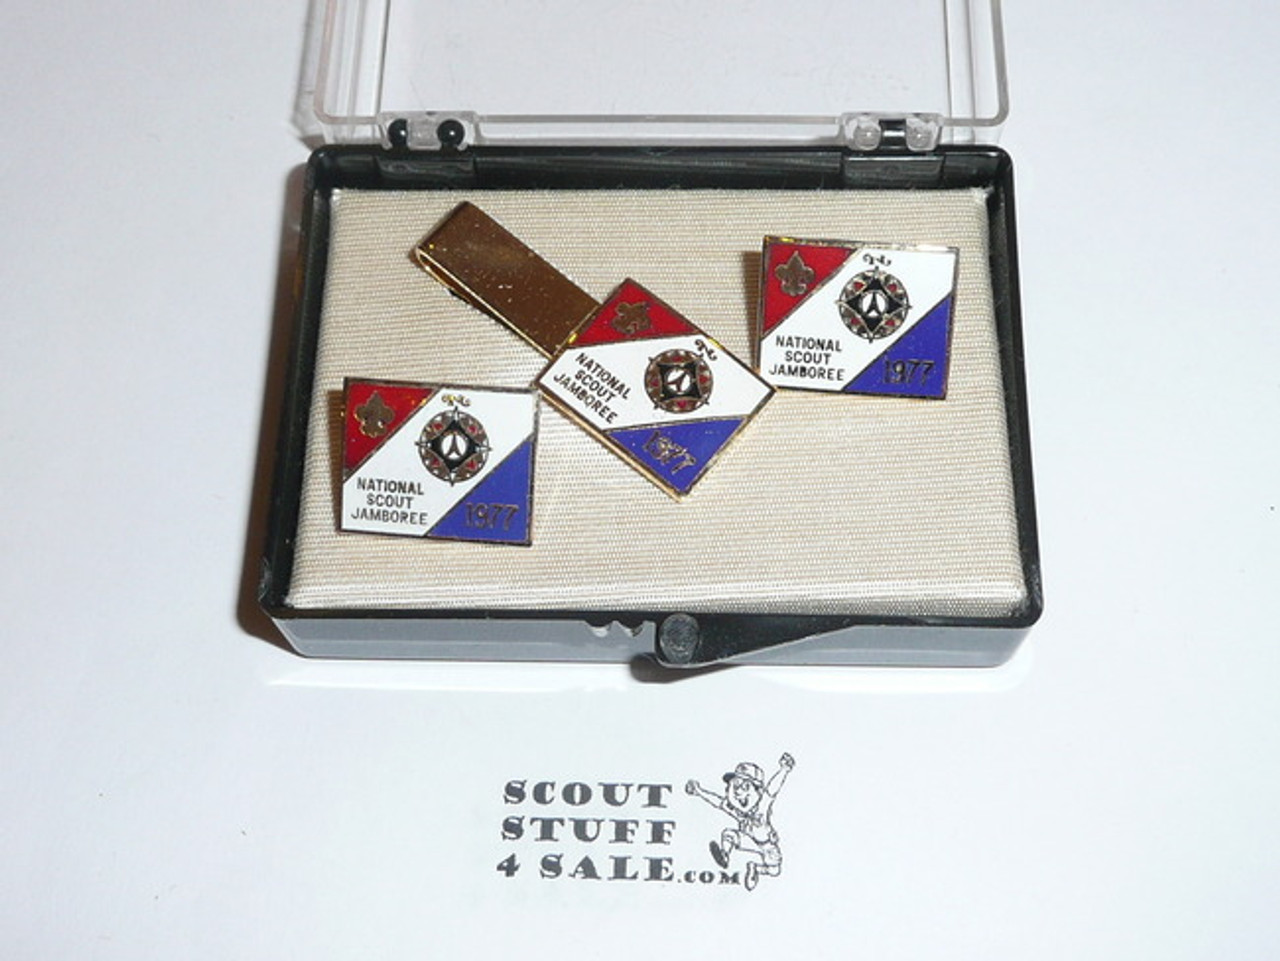 1977 National Jamboree Tie Clip and Cuff Link Set